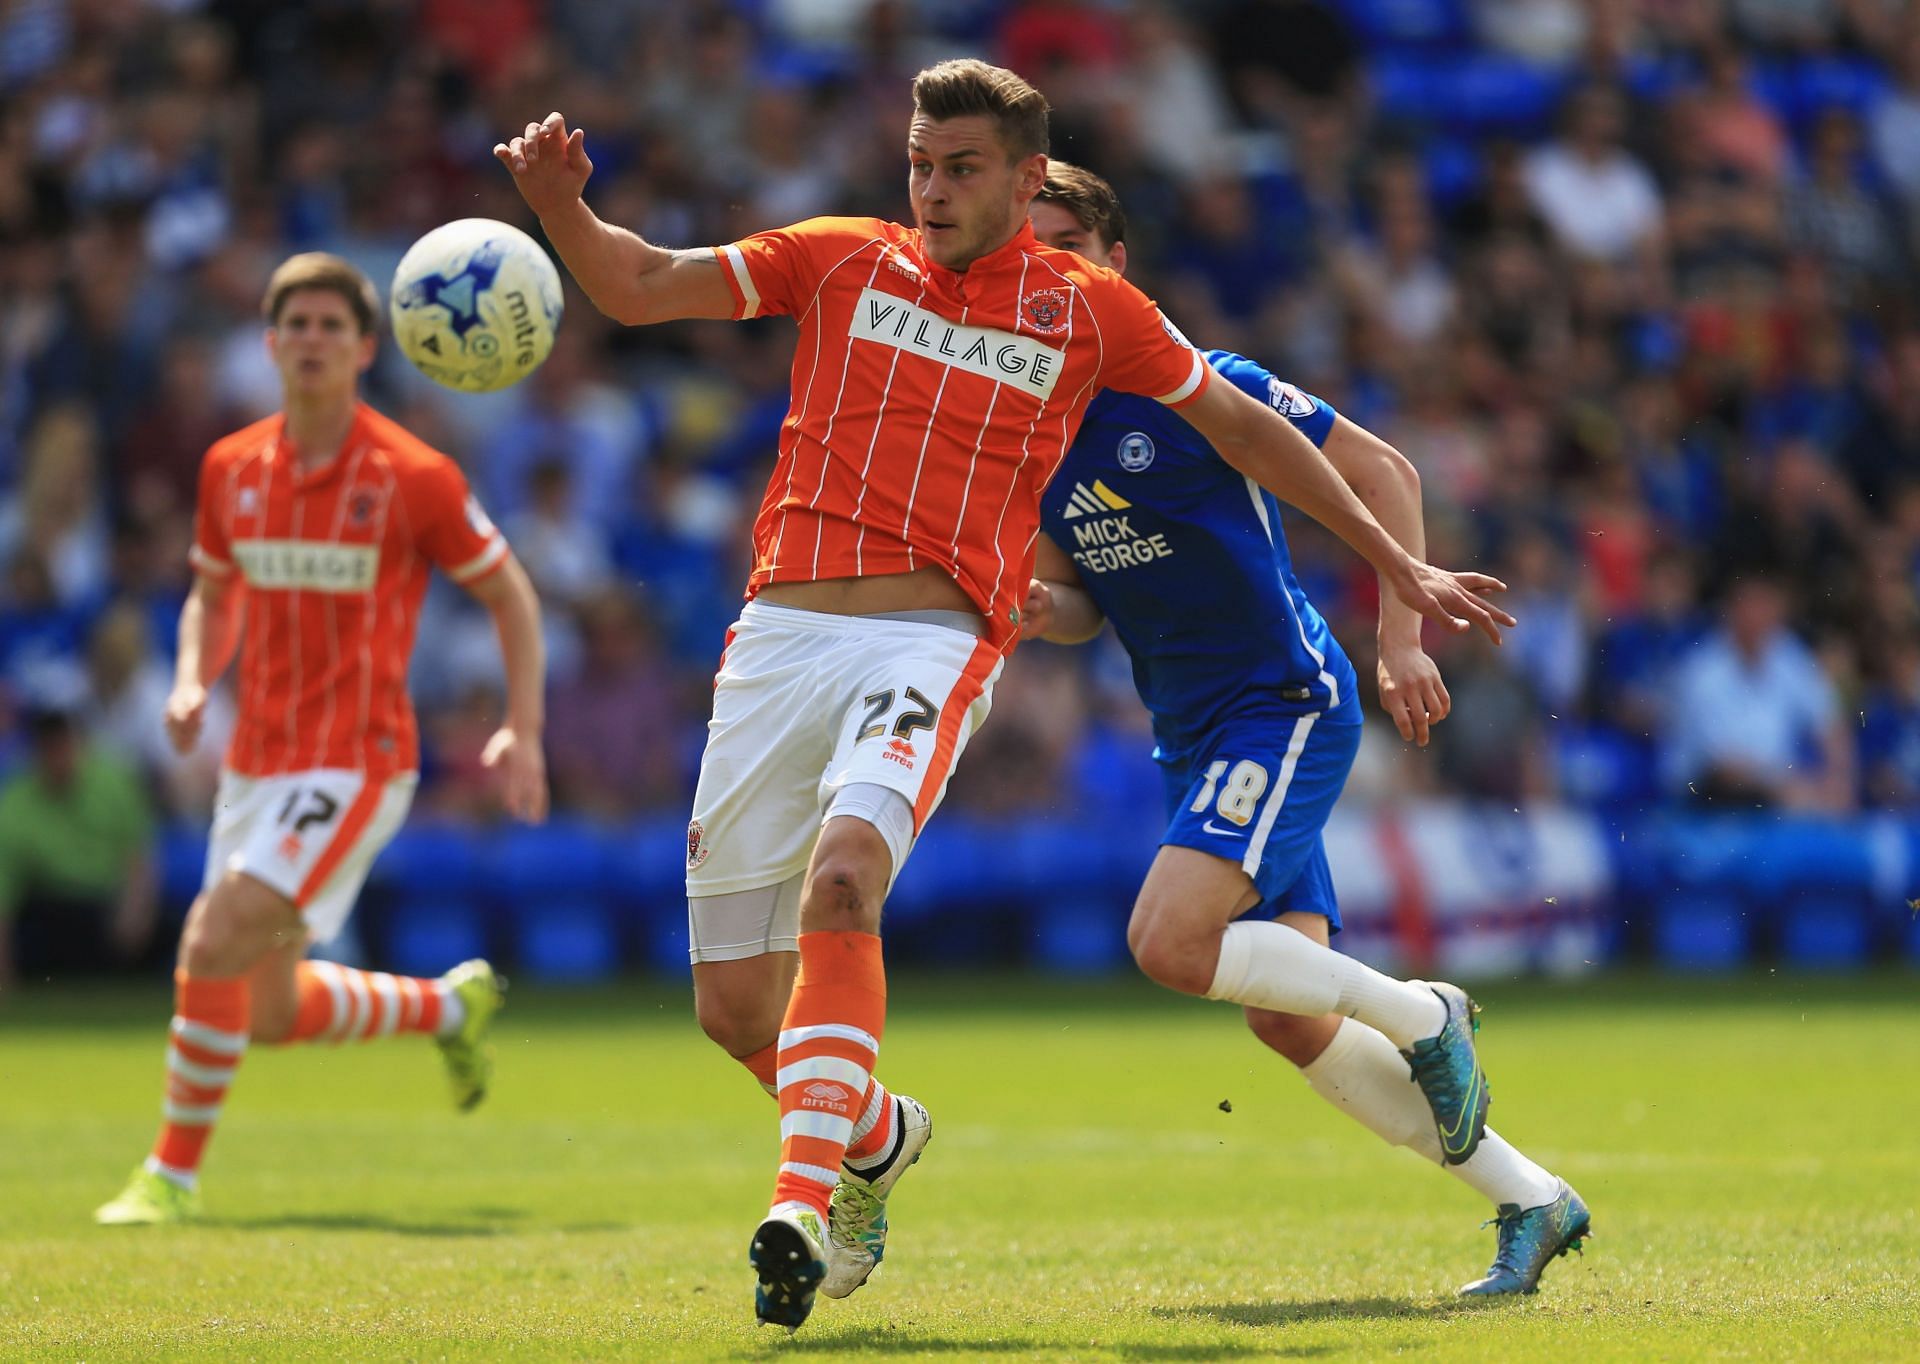 Blackpool are looking to make it five wins in a row against Peterborough